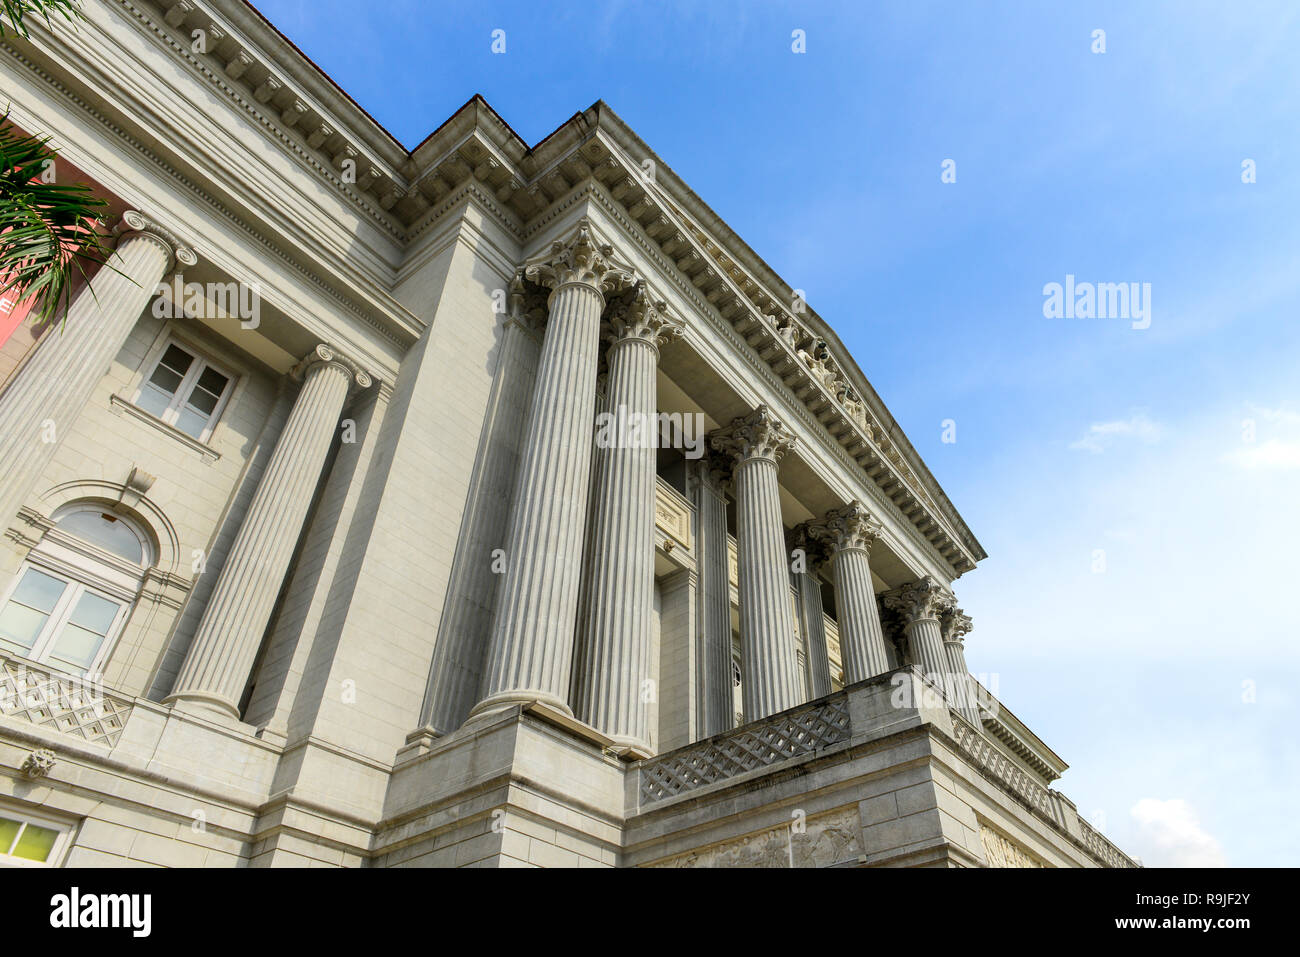 SINGAPORE - NOVEMBER 16, 2018 : Old Supreme court building and today it houses  the National Art Gallery is the largest visual arts venue in Singapore Stock Photo